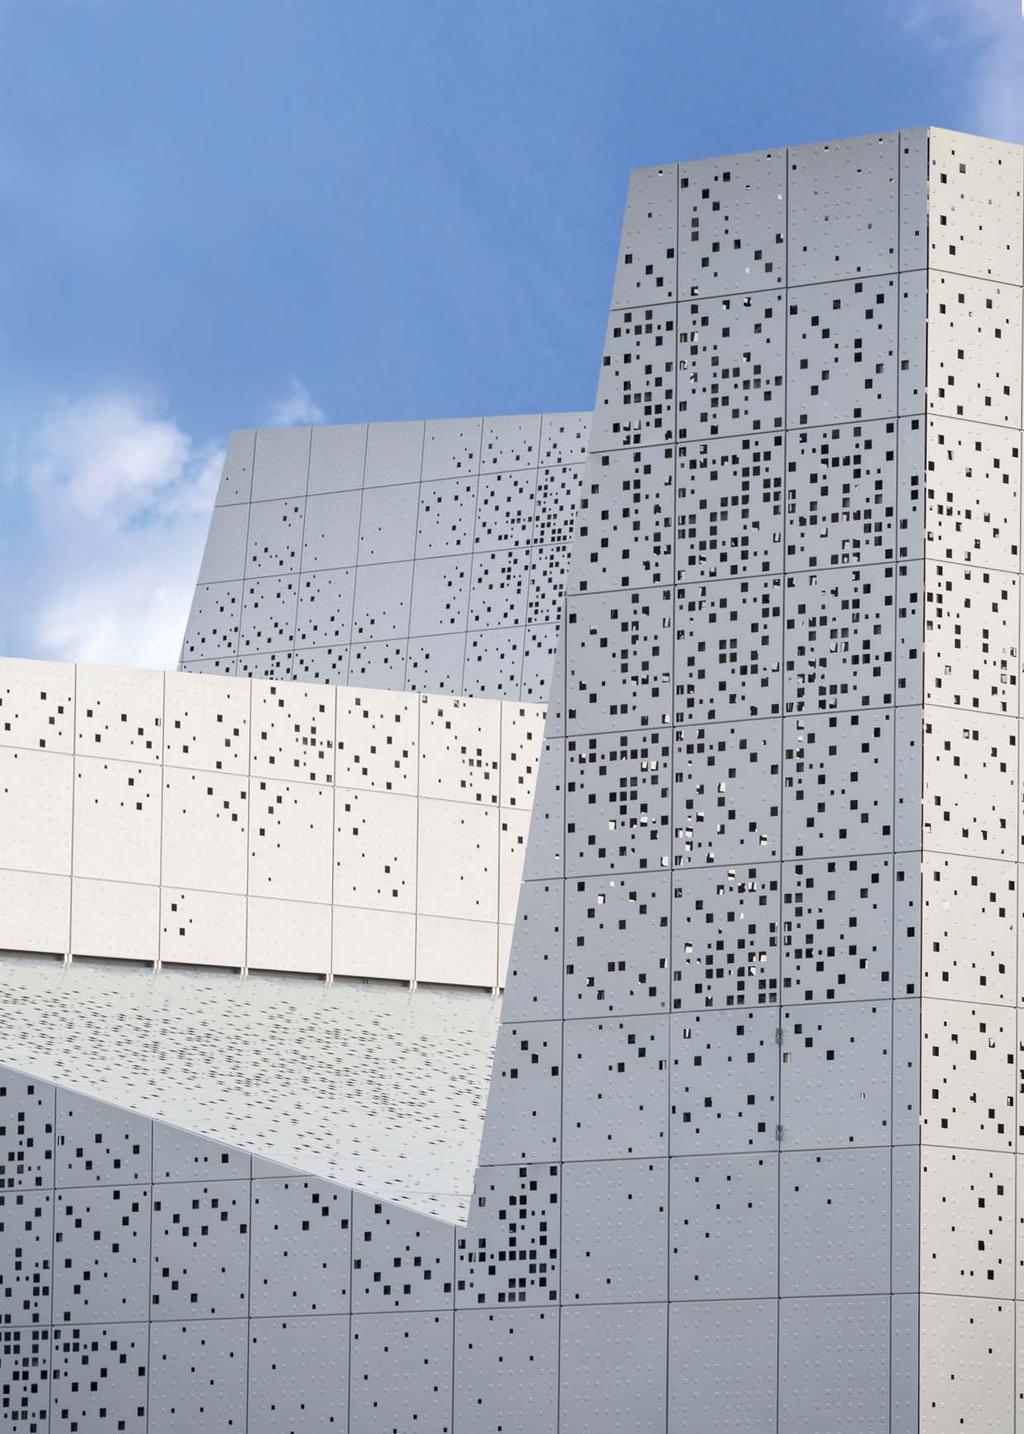 Cleaning PVdF coatings provide an easy to clean surface. In contrast to polyster-coated aluminium cladding, ff2 and ff3 facades are dirt-repellent and require very little maintenance.